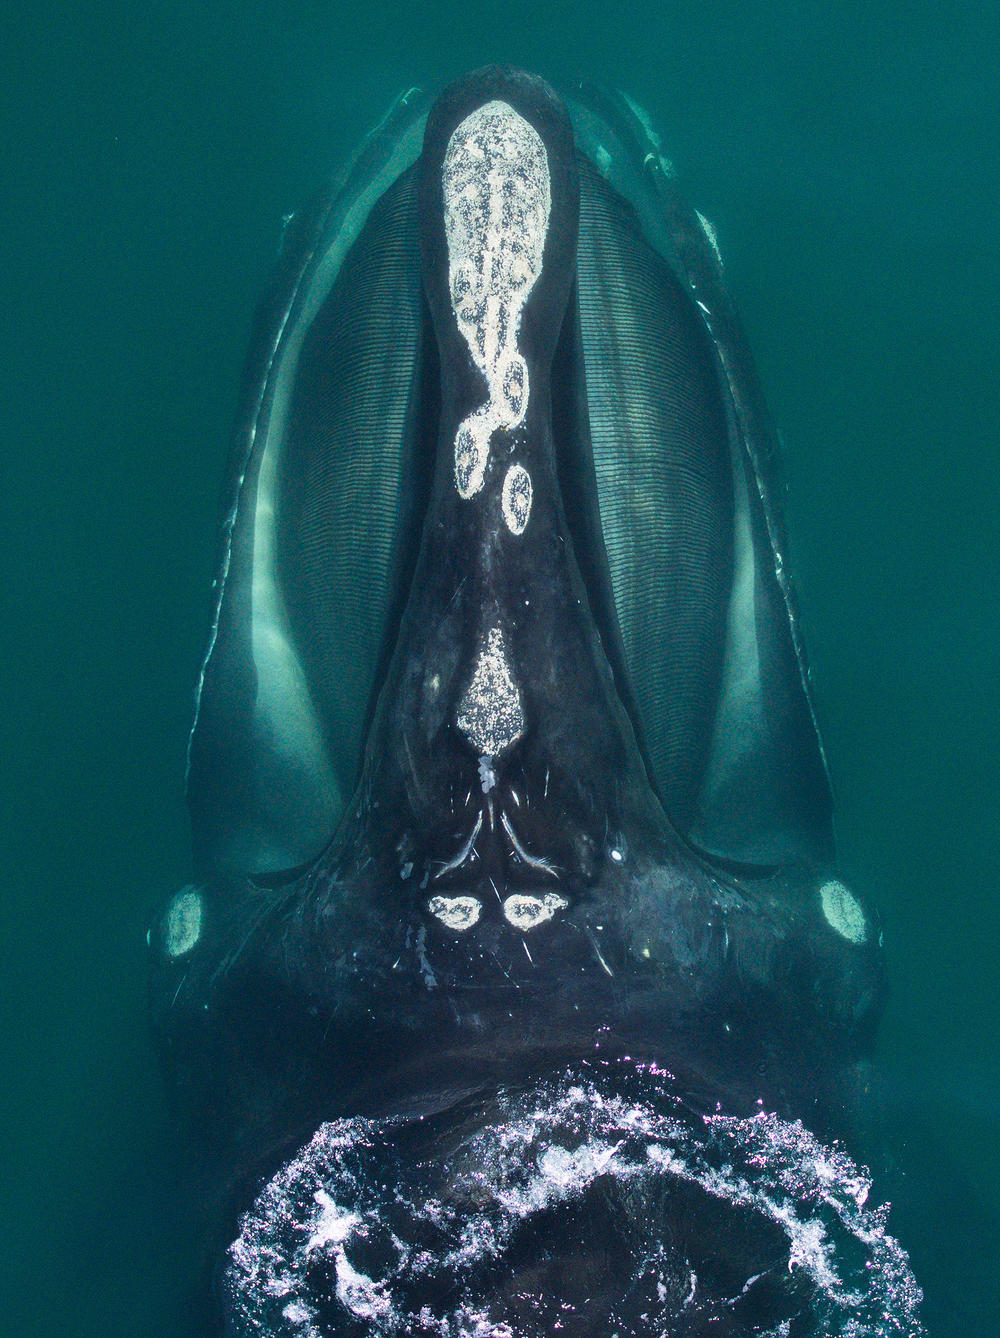 A North Atlantic right whale in Cape Cod Bay. The callosity patterns on each whale's head are unique and allow for identification, along with tracking of impacts such as entanglements and vessel strikes, reproductive histories, and ages of individual whales.